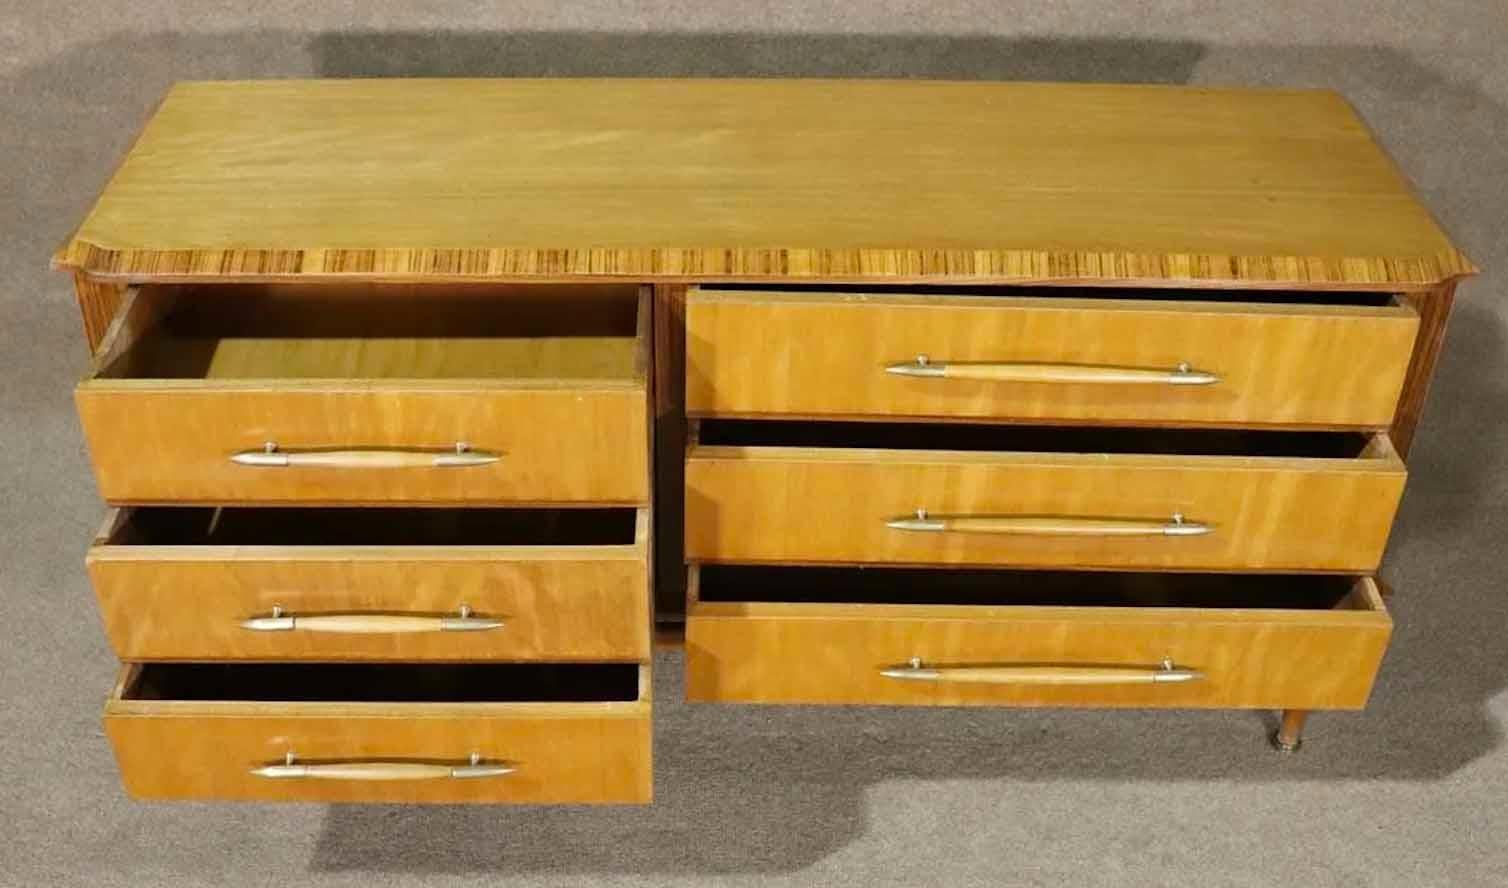 Detailed Italian dresser with beautiful wood grain throughout. Six drawers accented by brass hardware.
Please confirm location.